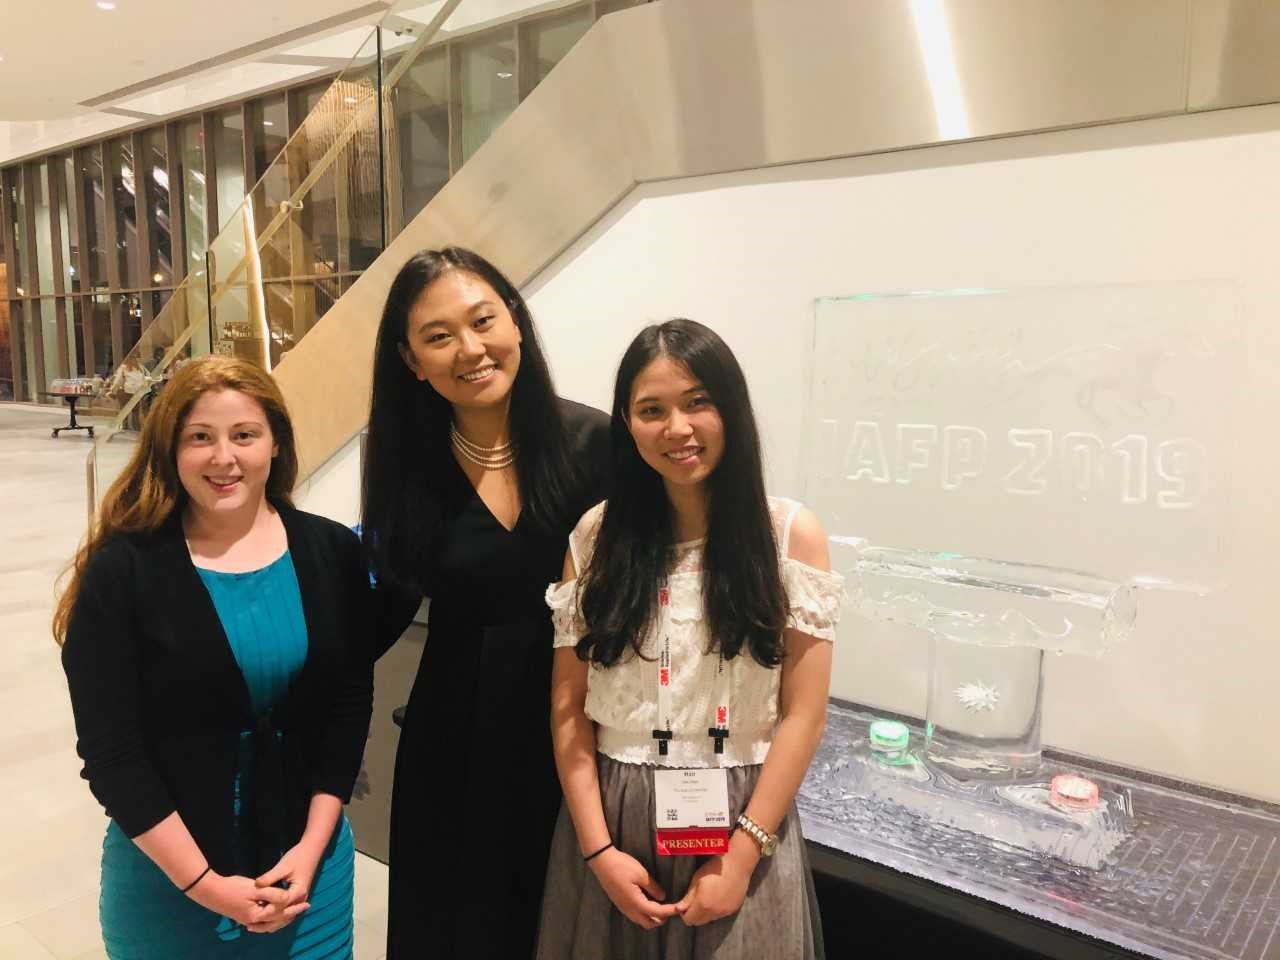  Tressie (right), Dr. Feng (middle), and Han standing in front of the ice sculpture of IAFP 2019